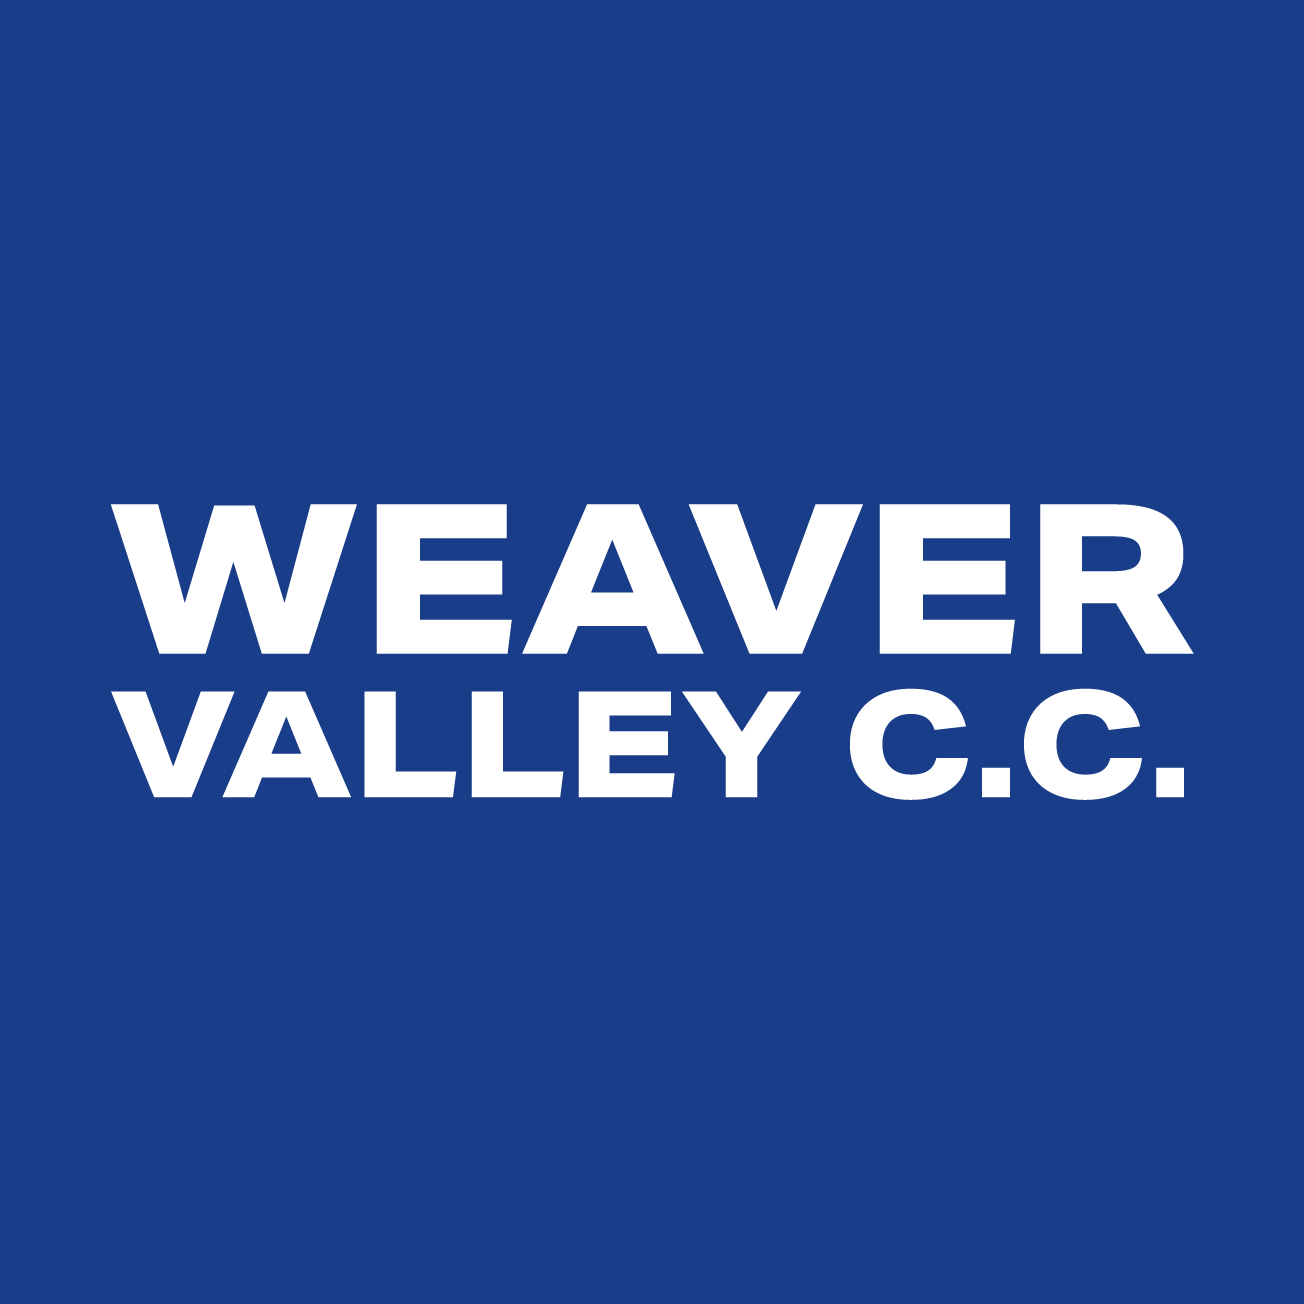 Club Image for WEAVER VALLEY CC